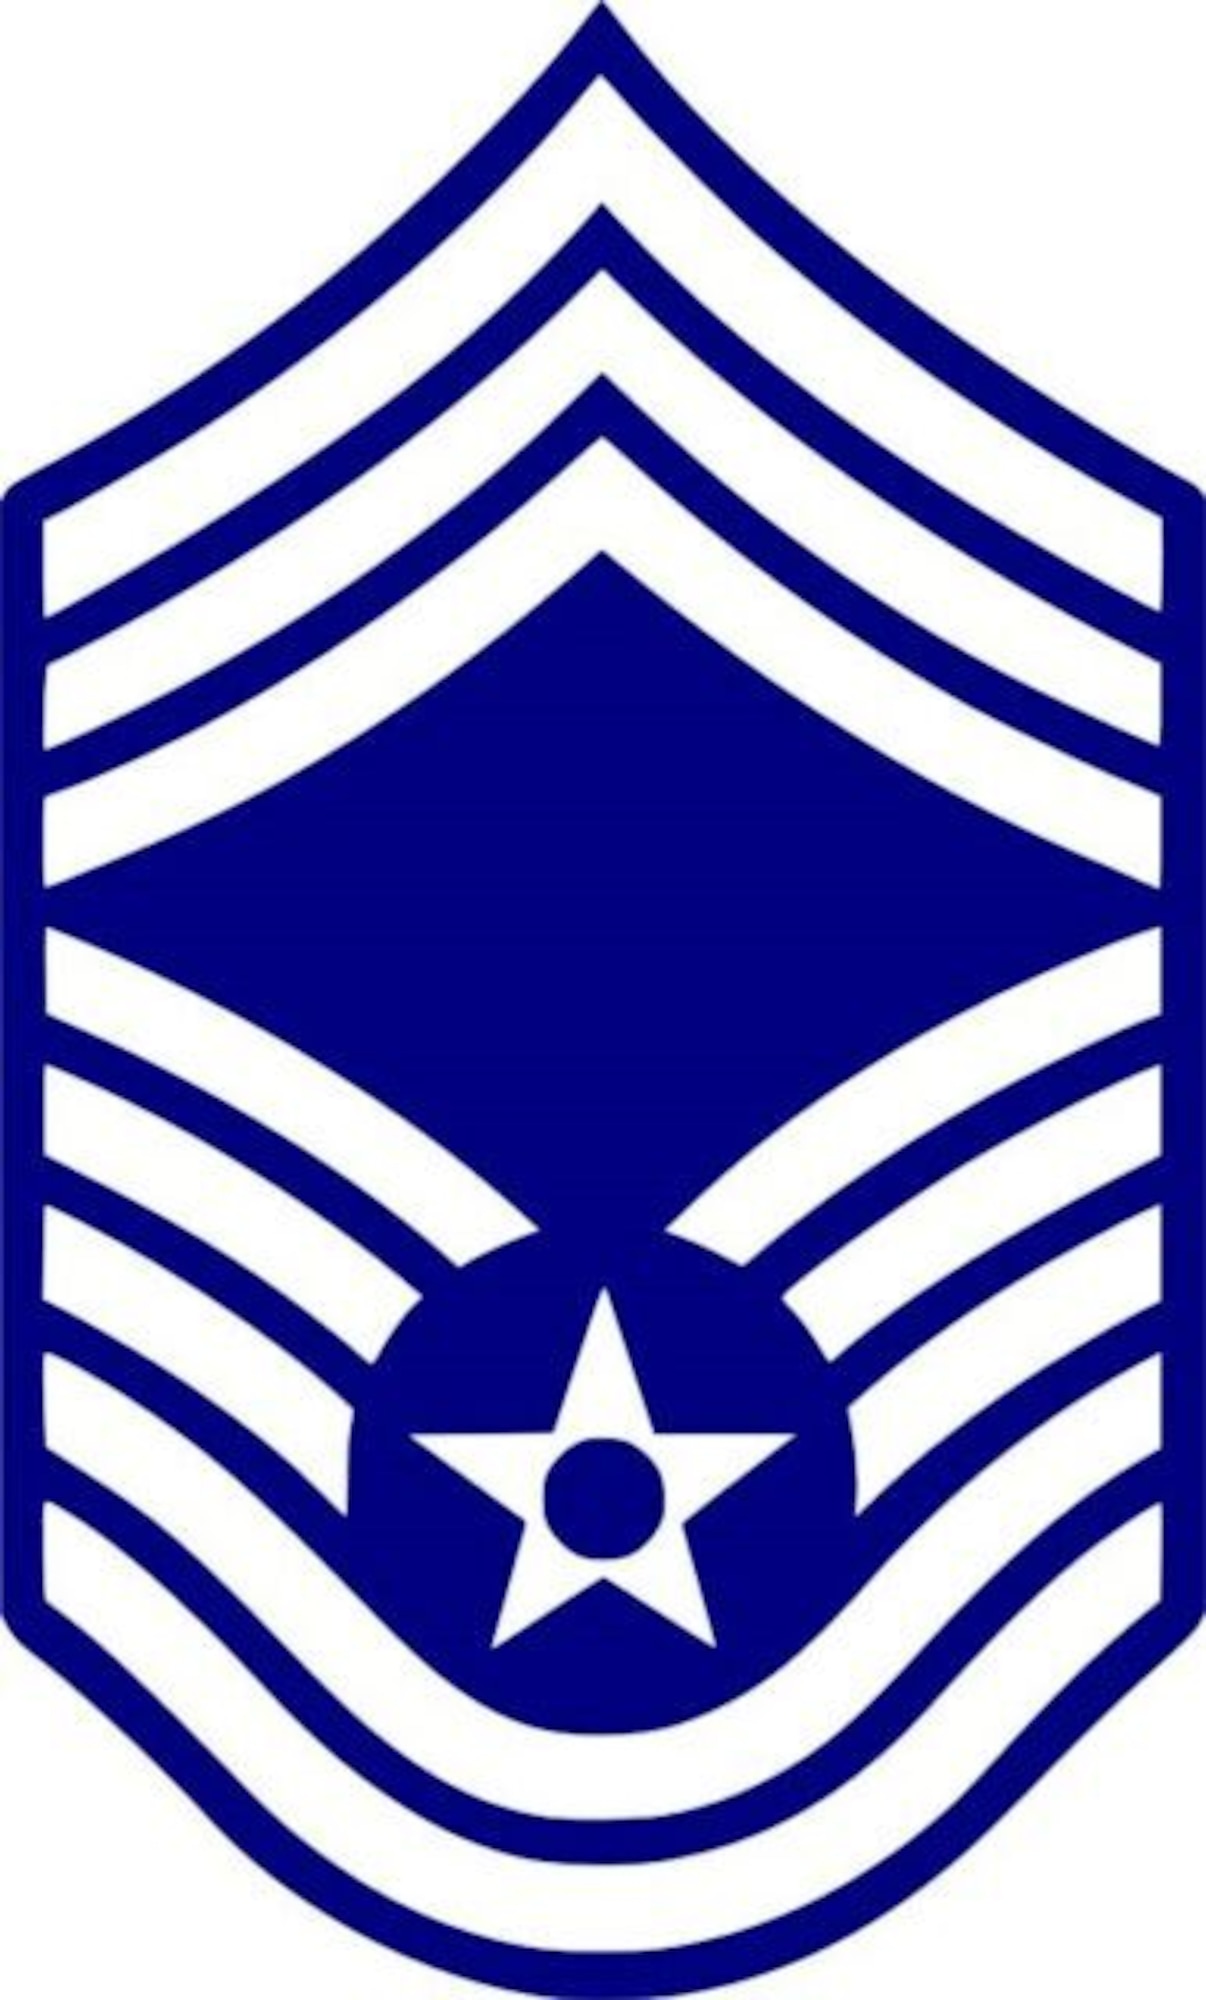 CMSgt. Icon for use of the 2020 Chief Master Sergeant selection ceremony